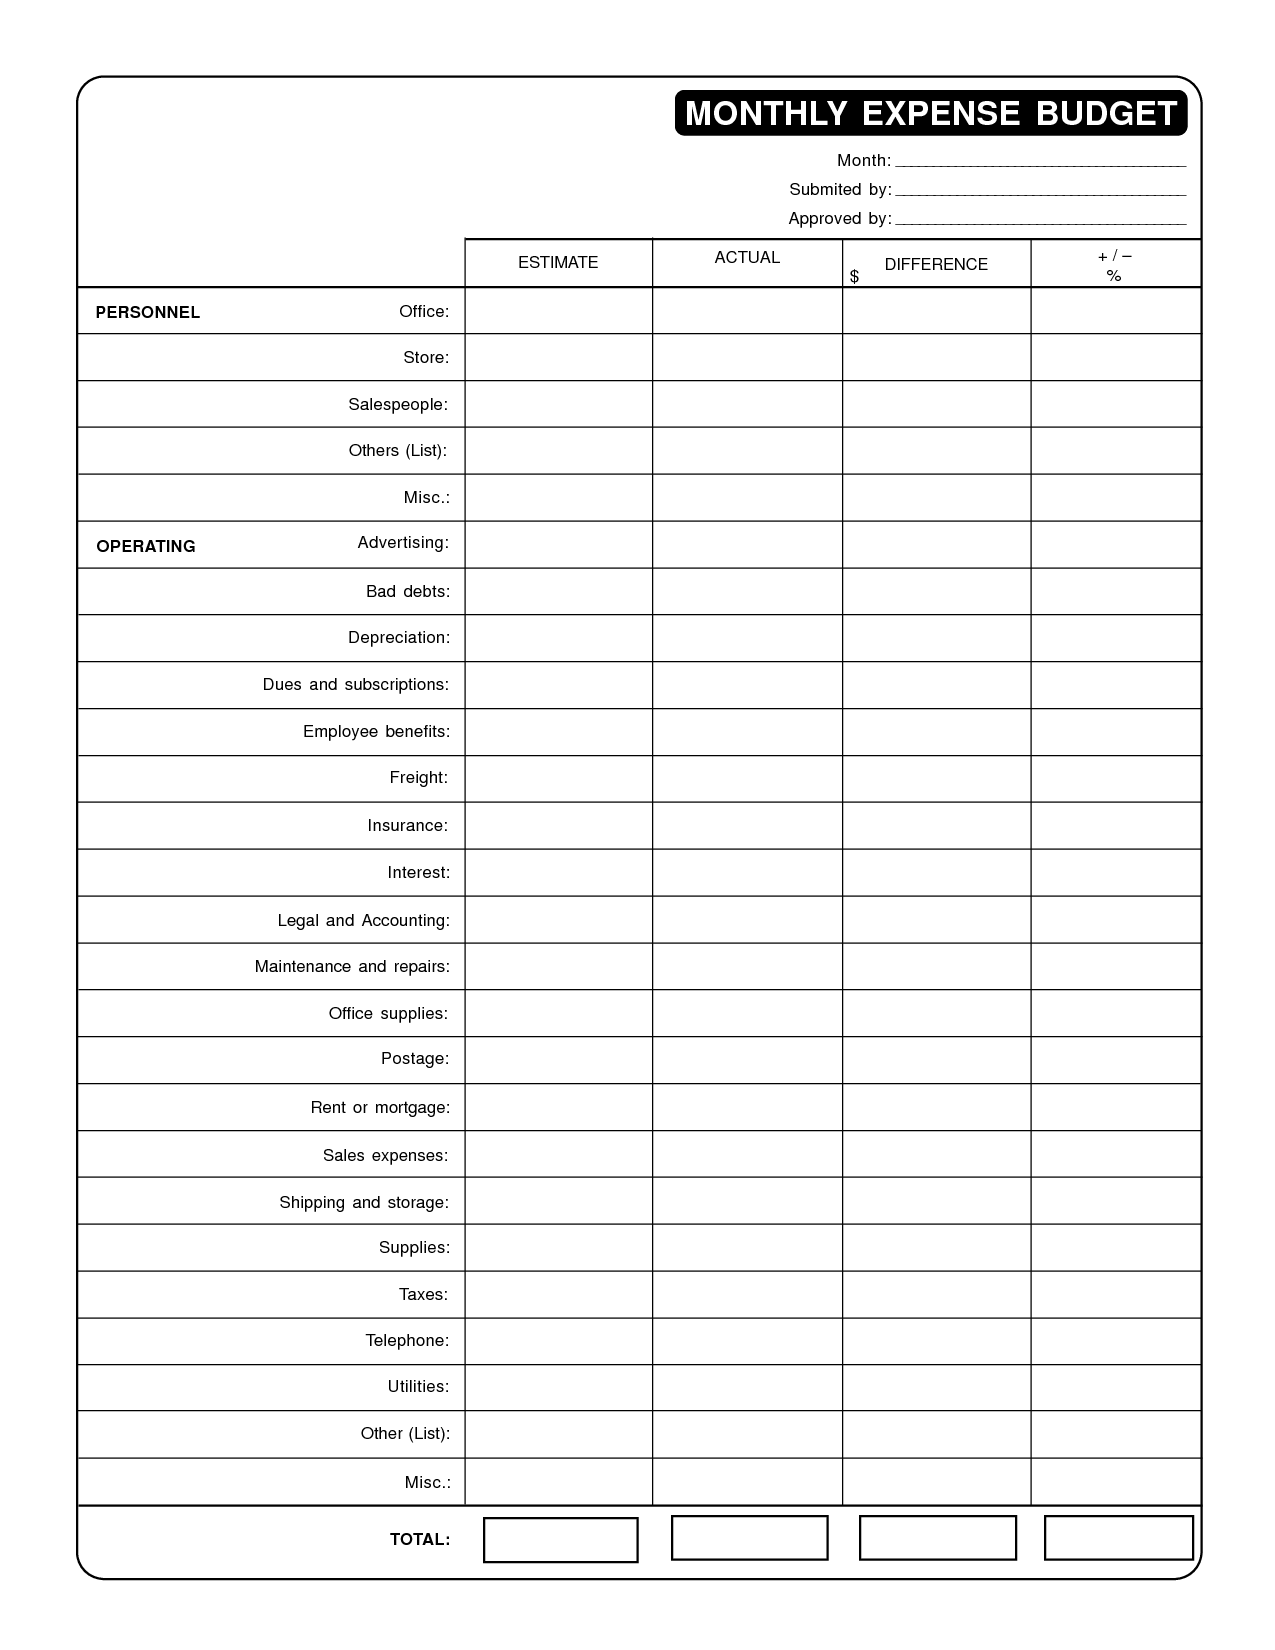 16 Best Images of Budget Worksheet Monthly Bill - Blank Monthly Budget